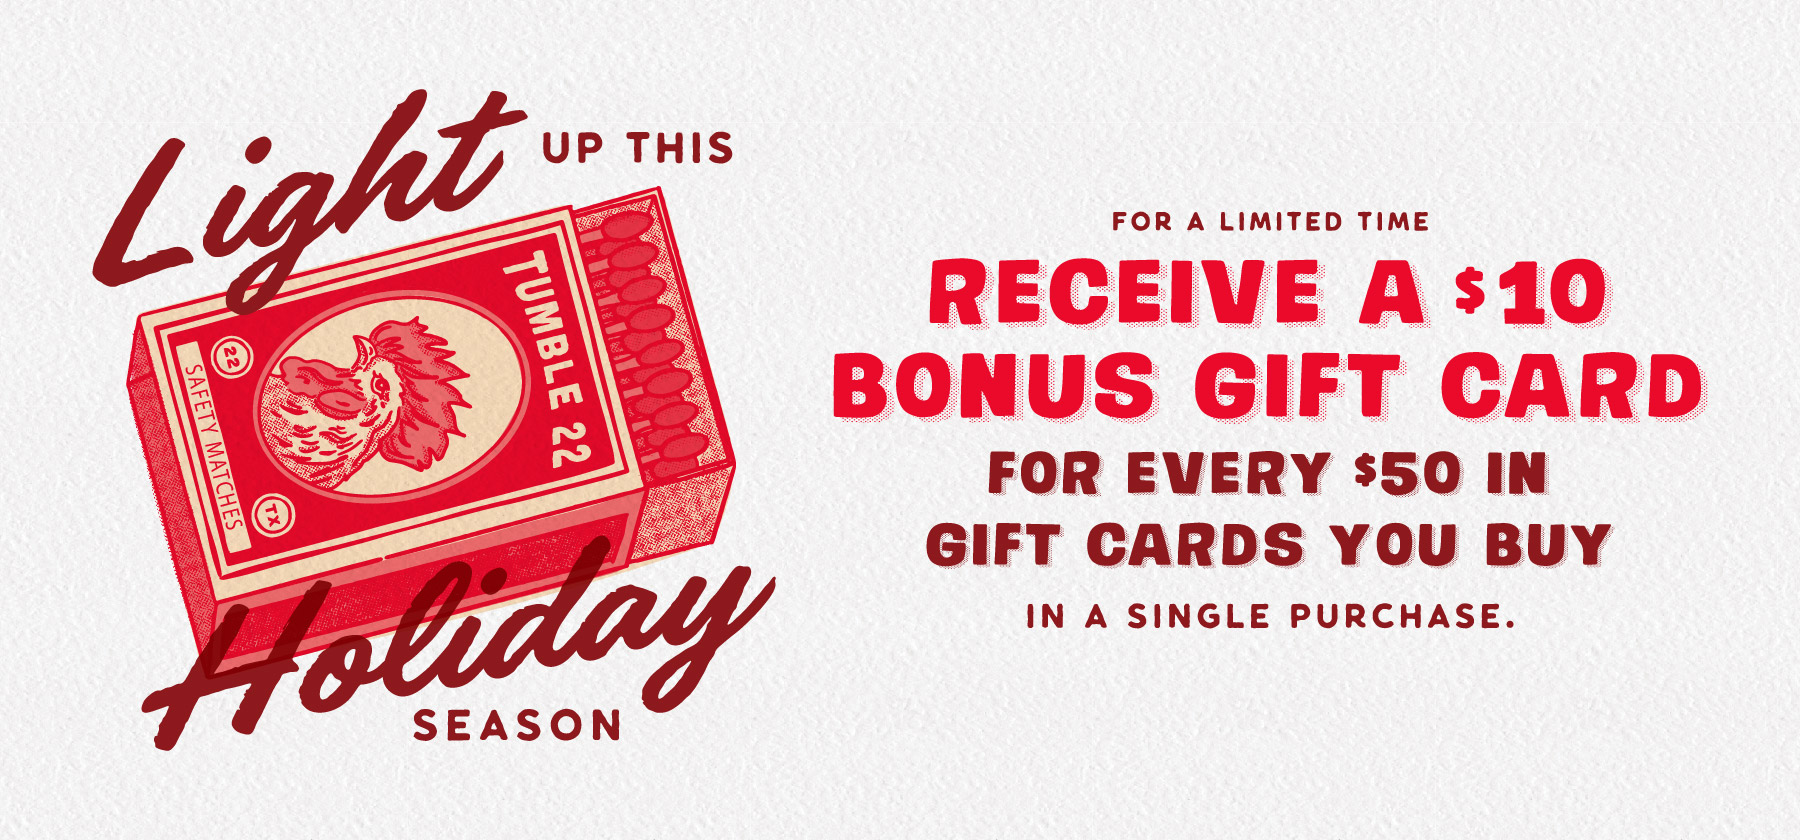 Receive a $10 Gift Card for every $50 in gift cards you buy in a single purchase